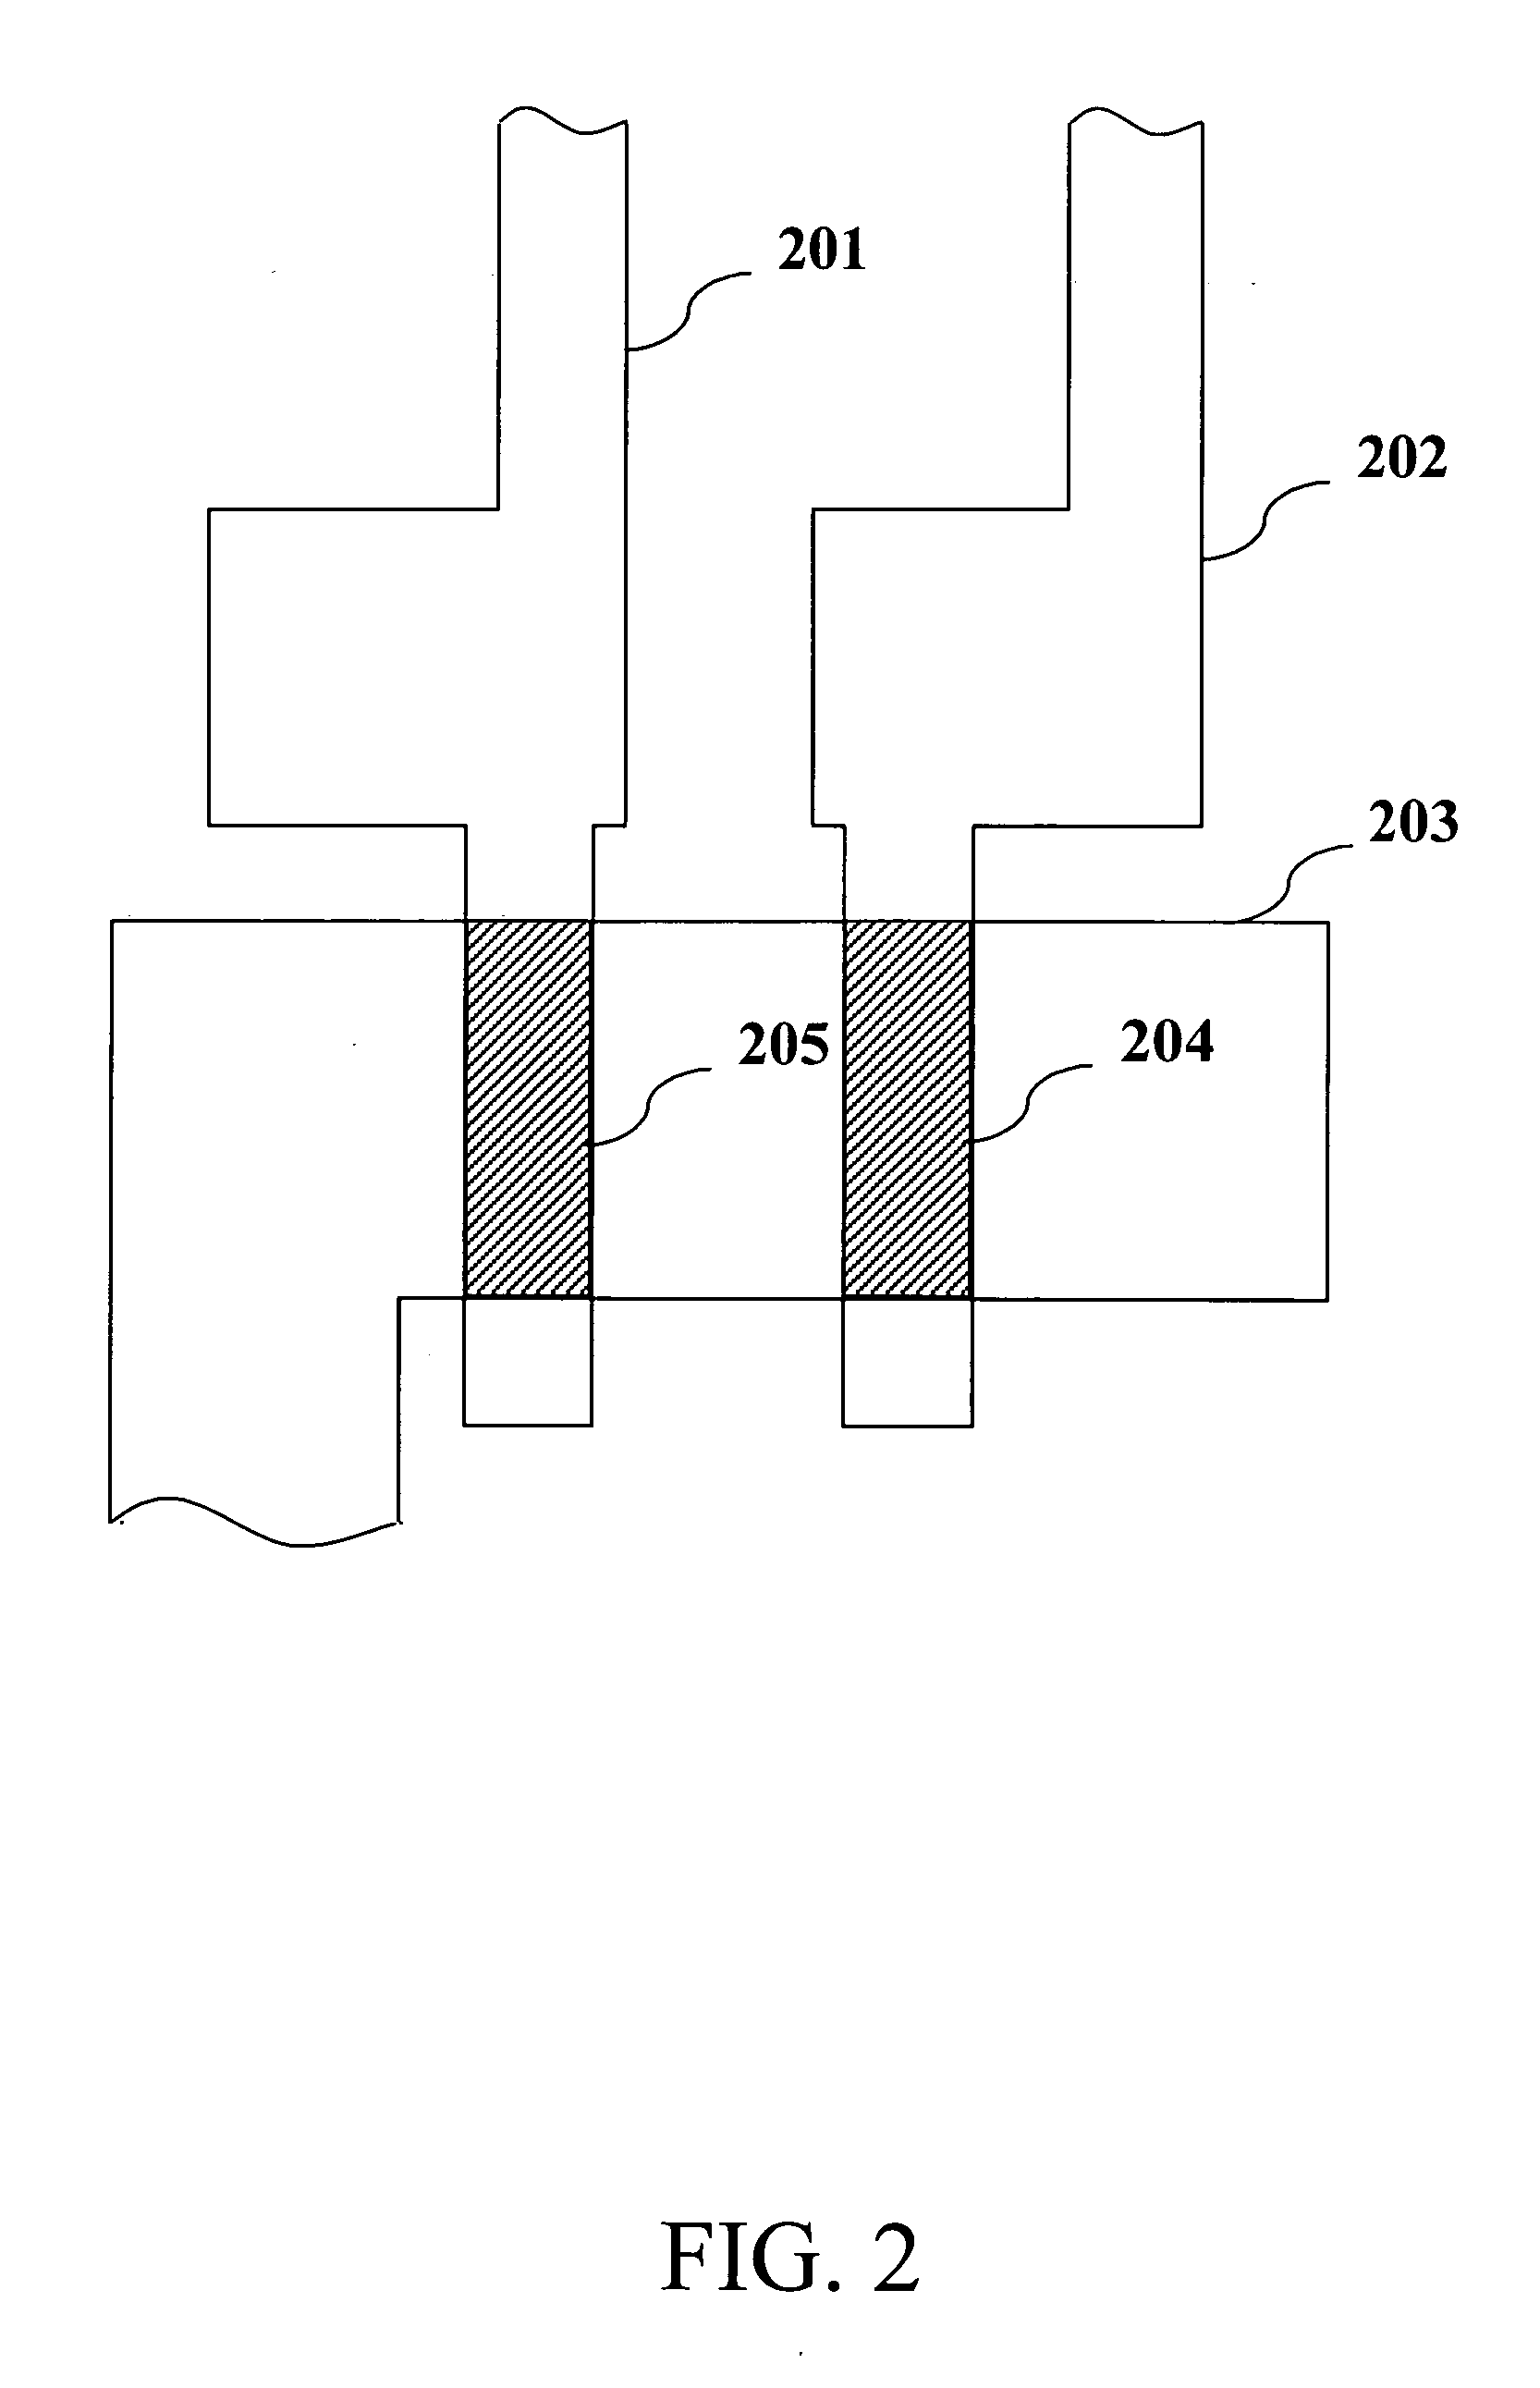 Method for improving accuracy of MOSFET models used in circuit simulation integrated circuits